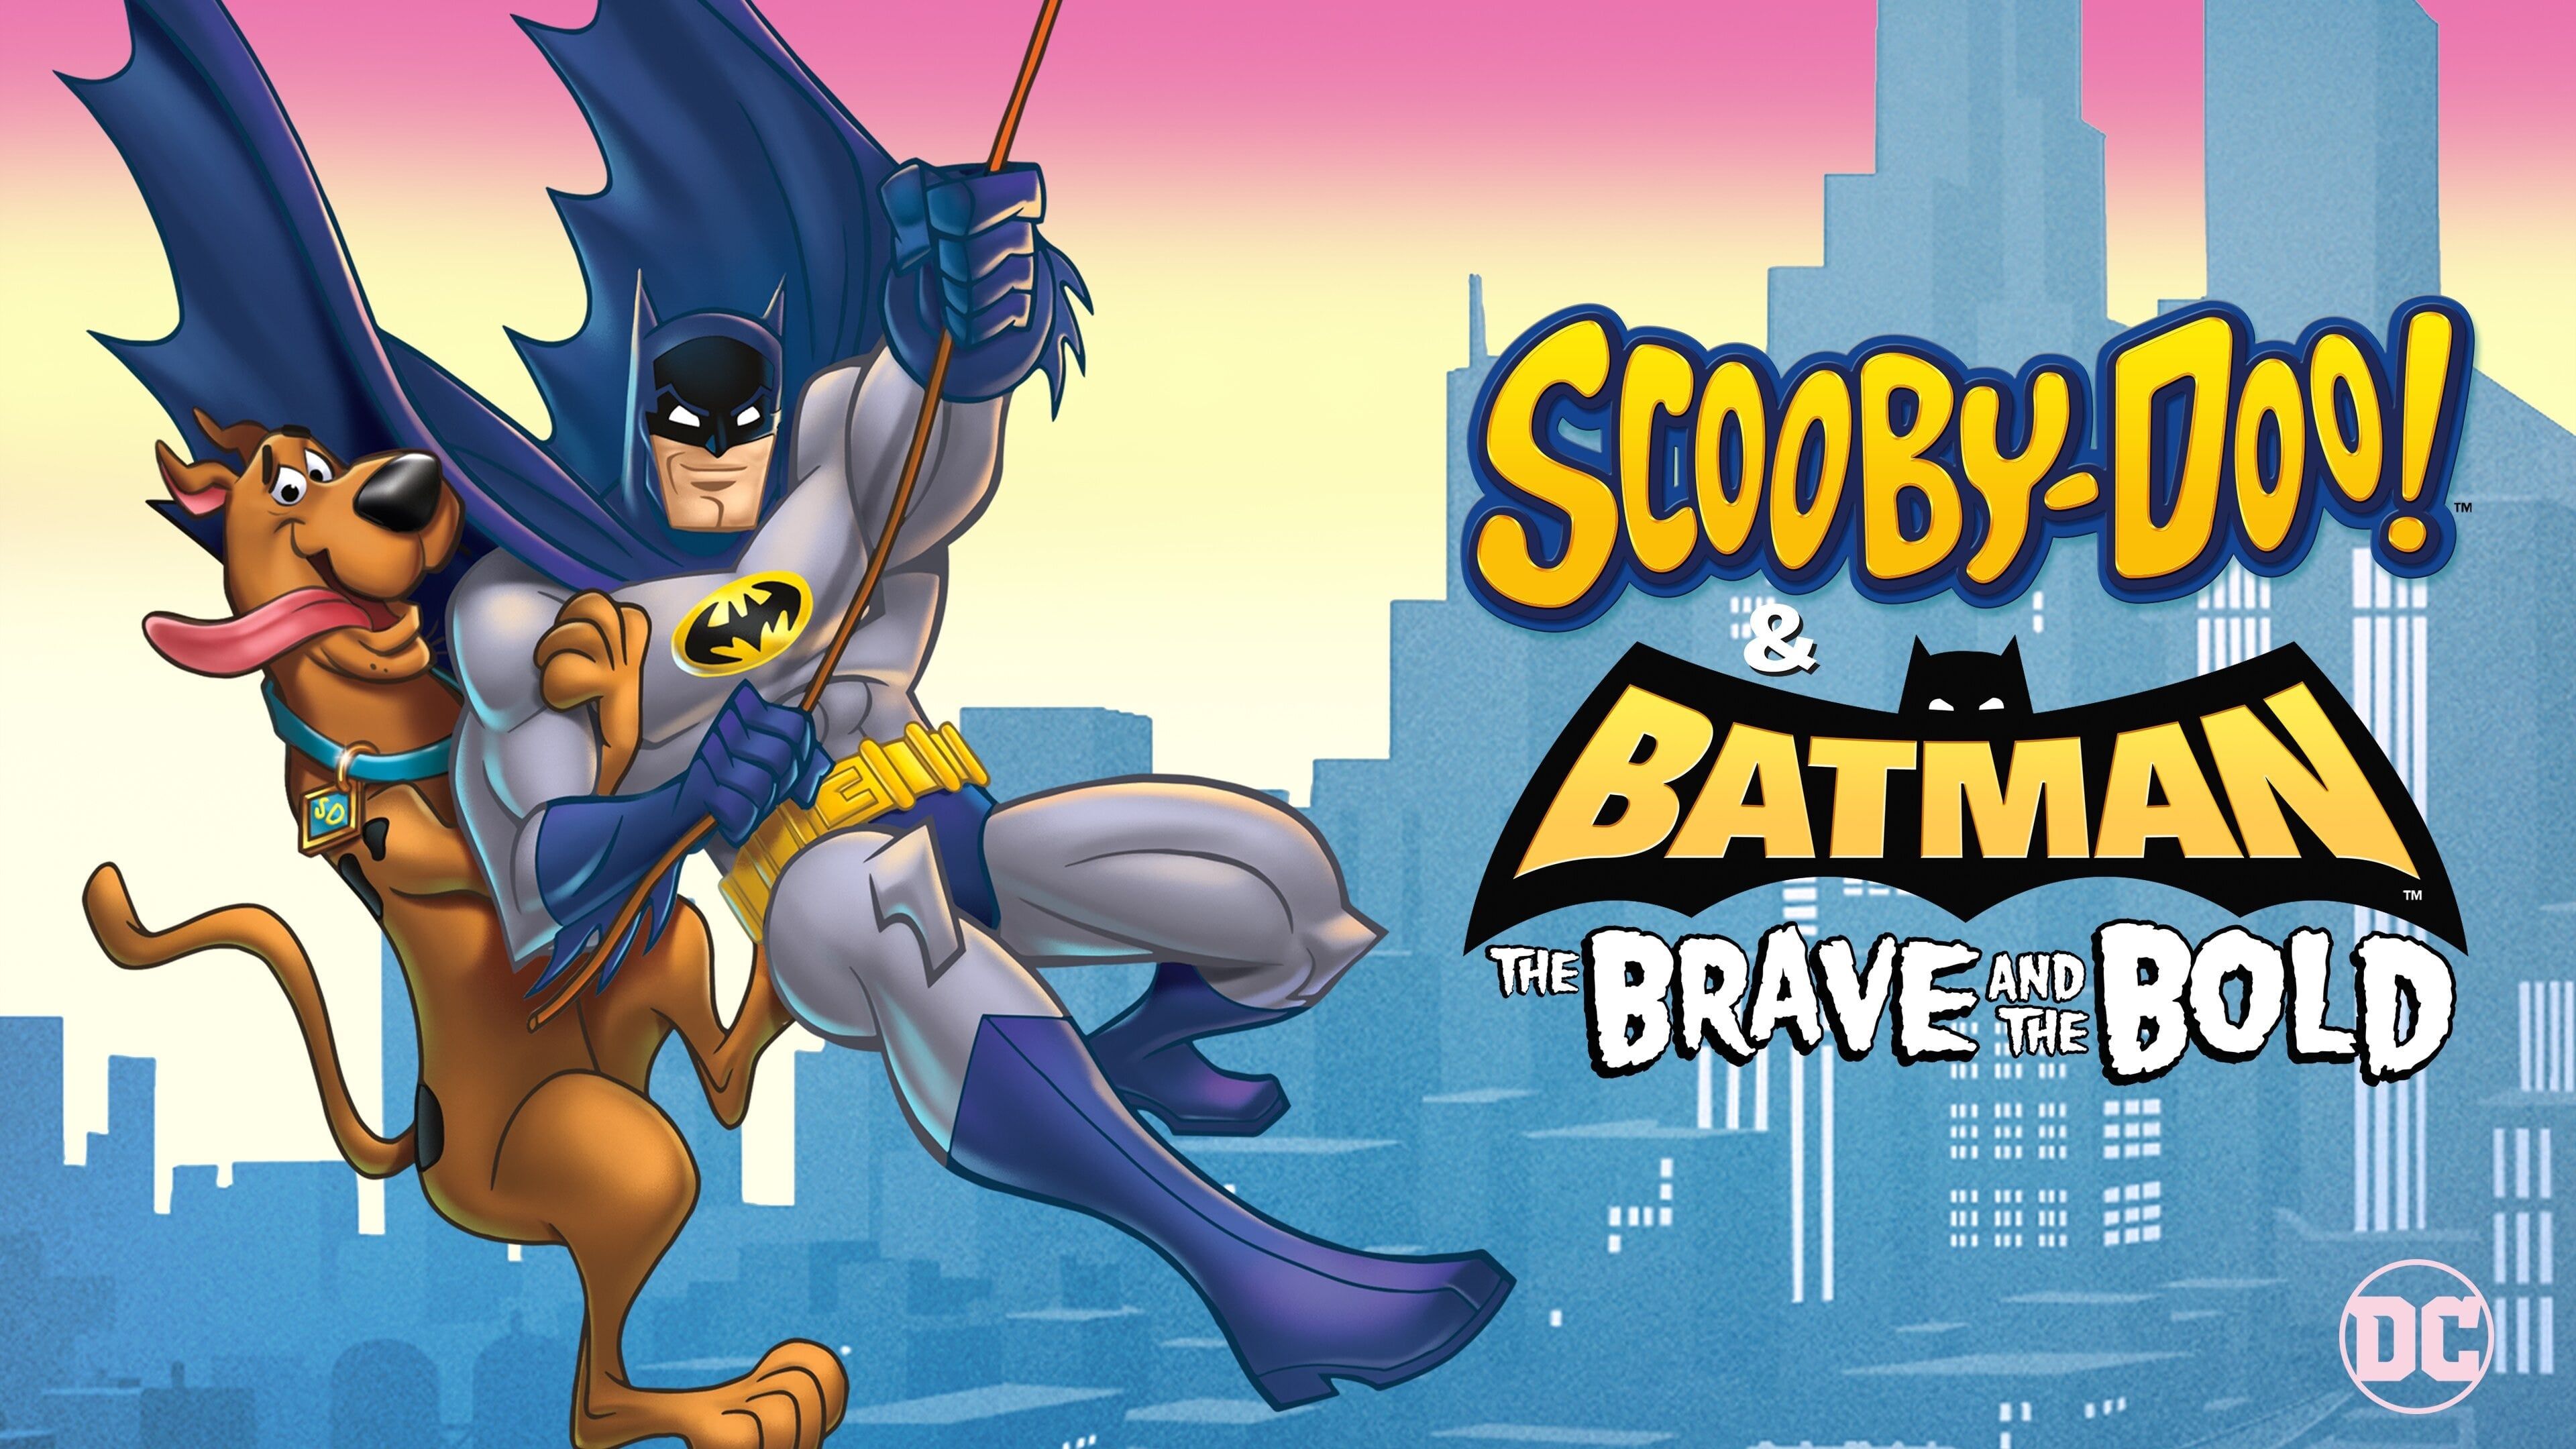 Scooby Doo & Batman: The Brave And The Bold 4k Ultra HD Wallpaper